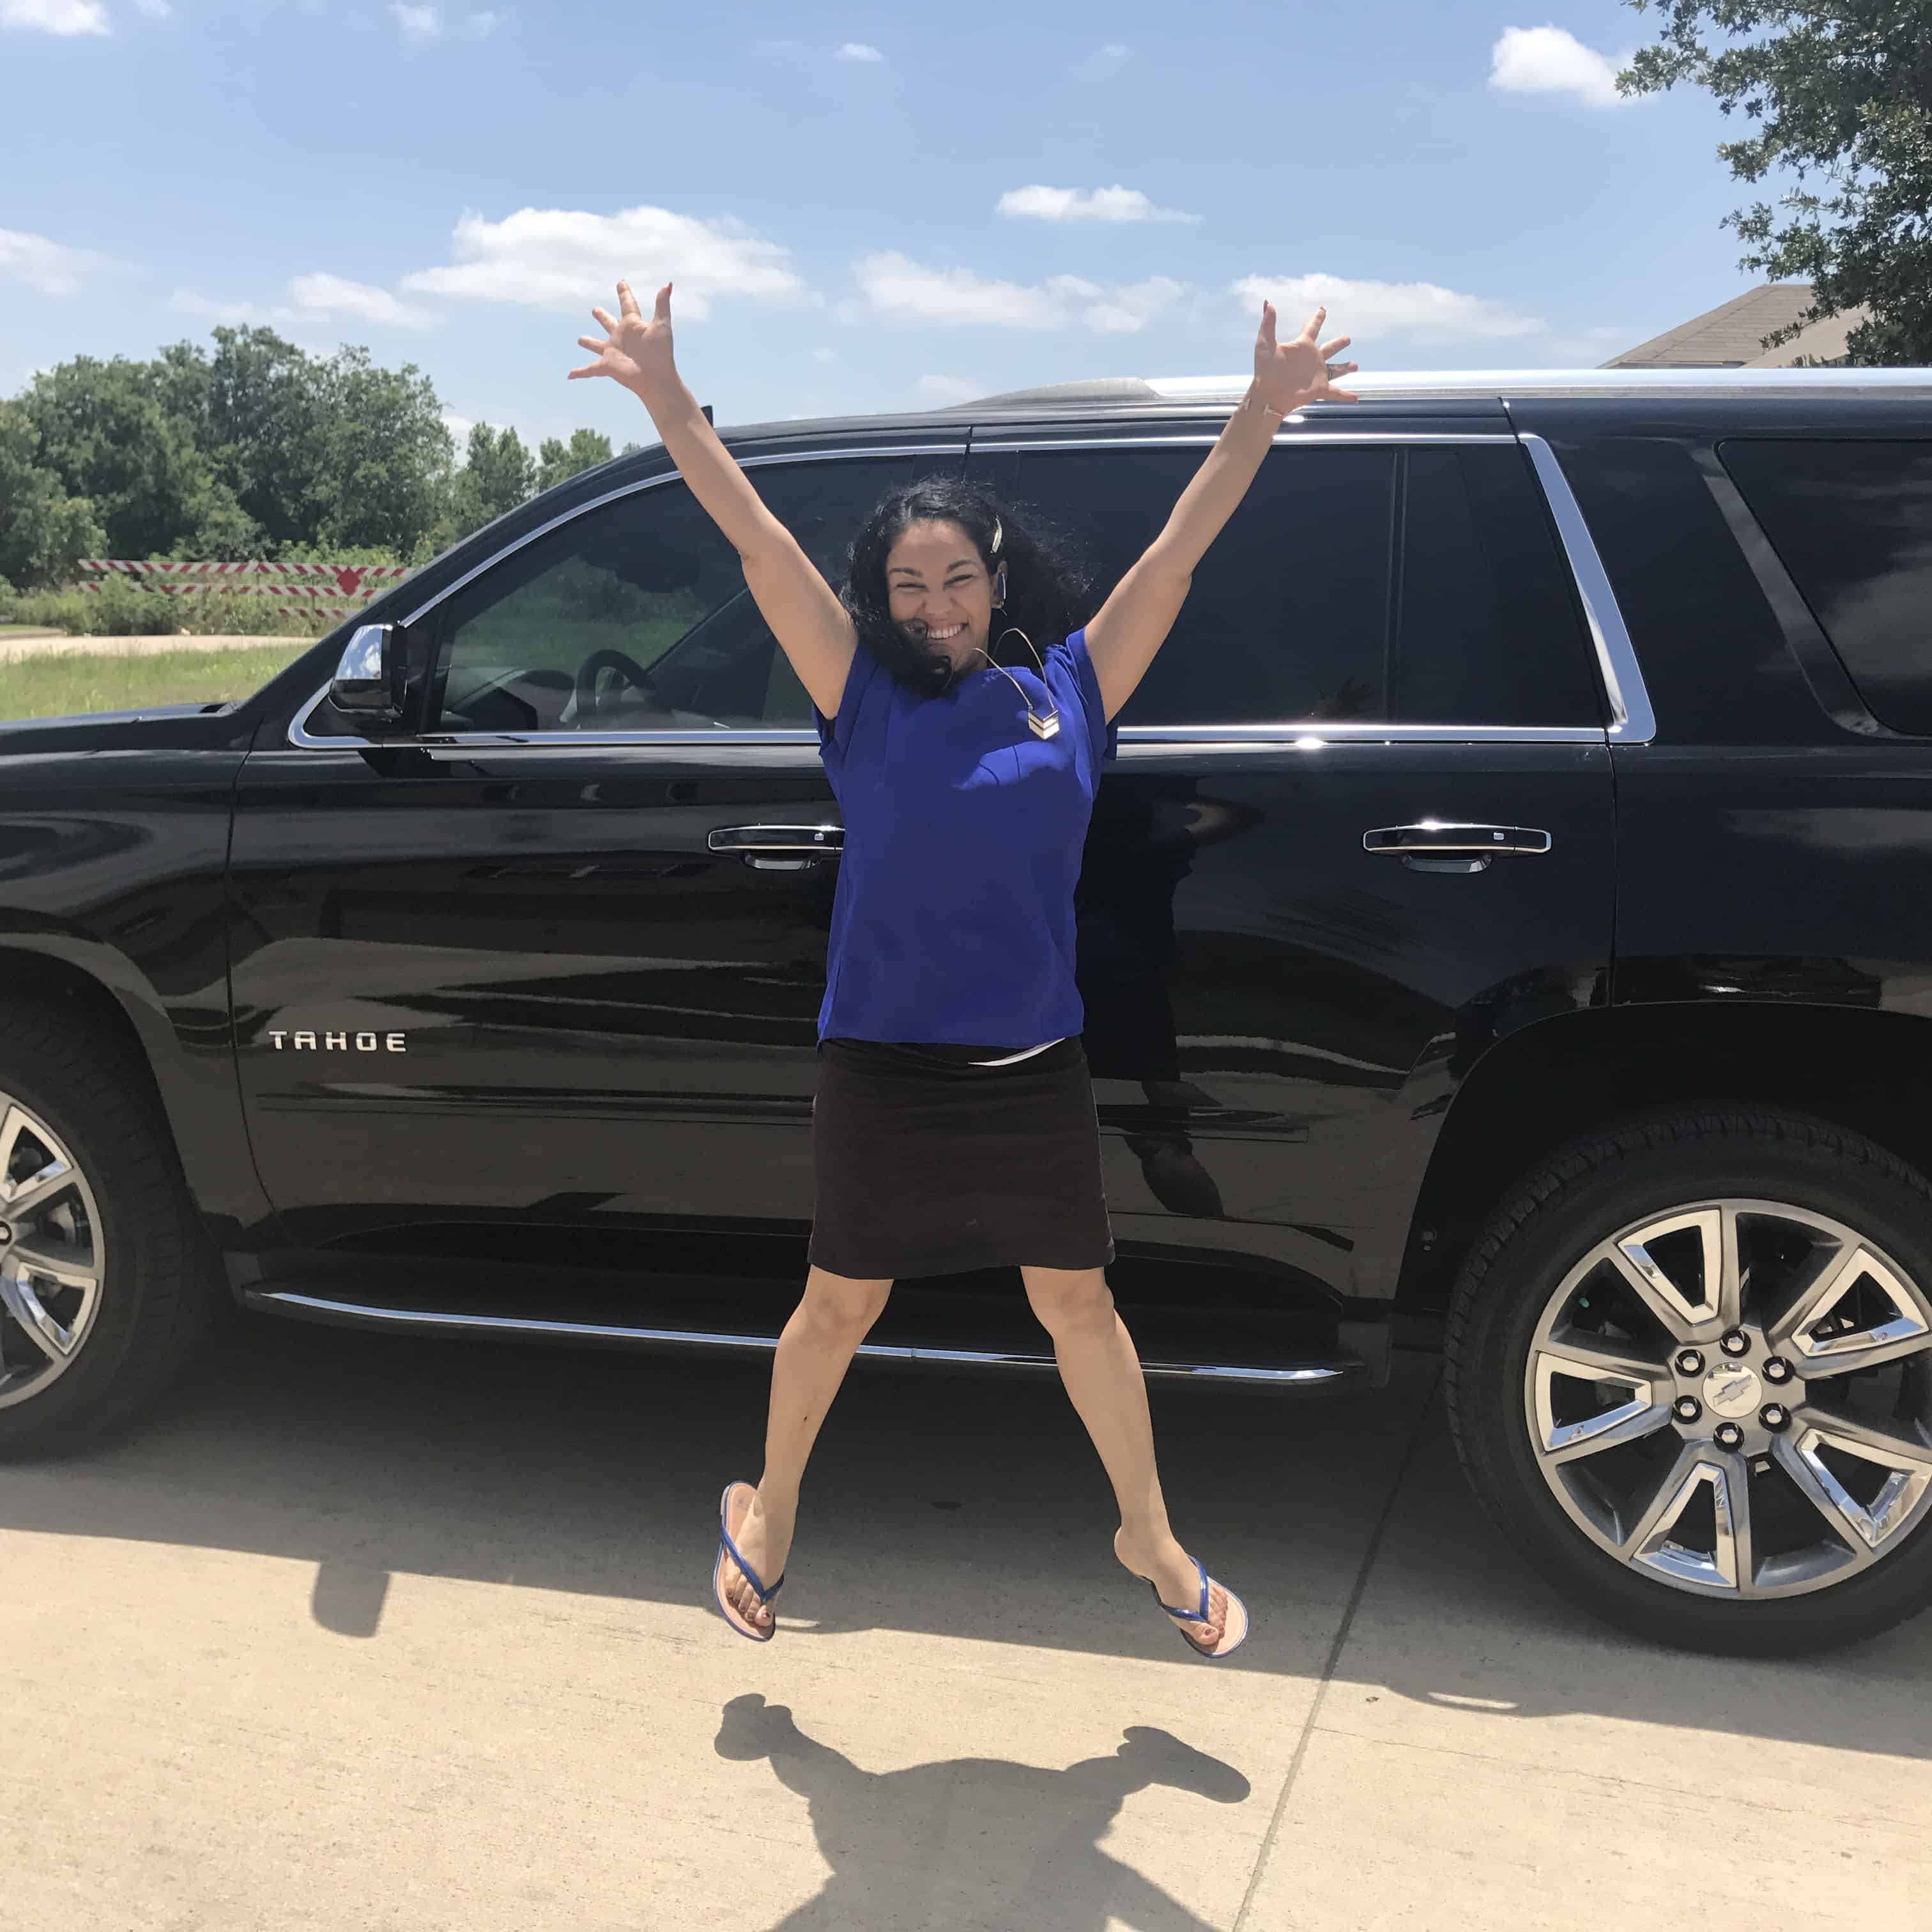 Partnering with Chevrolet to review the Chevy Tahoe